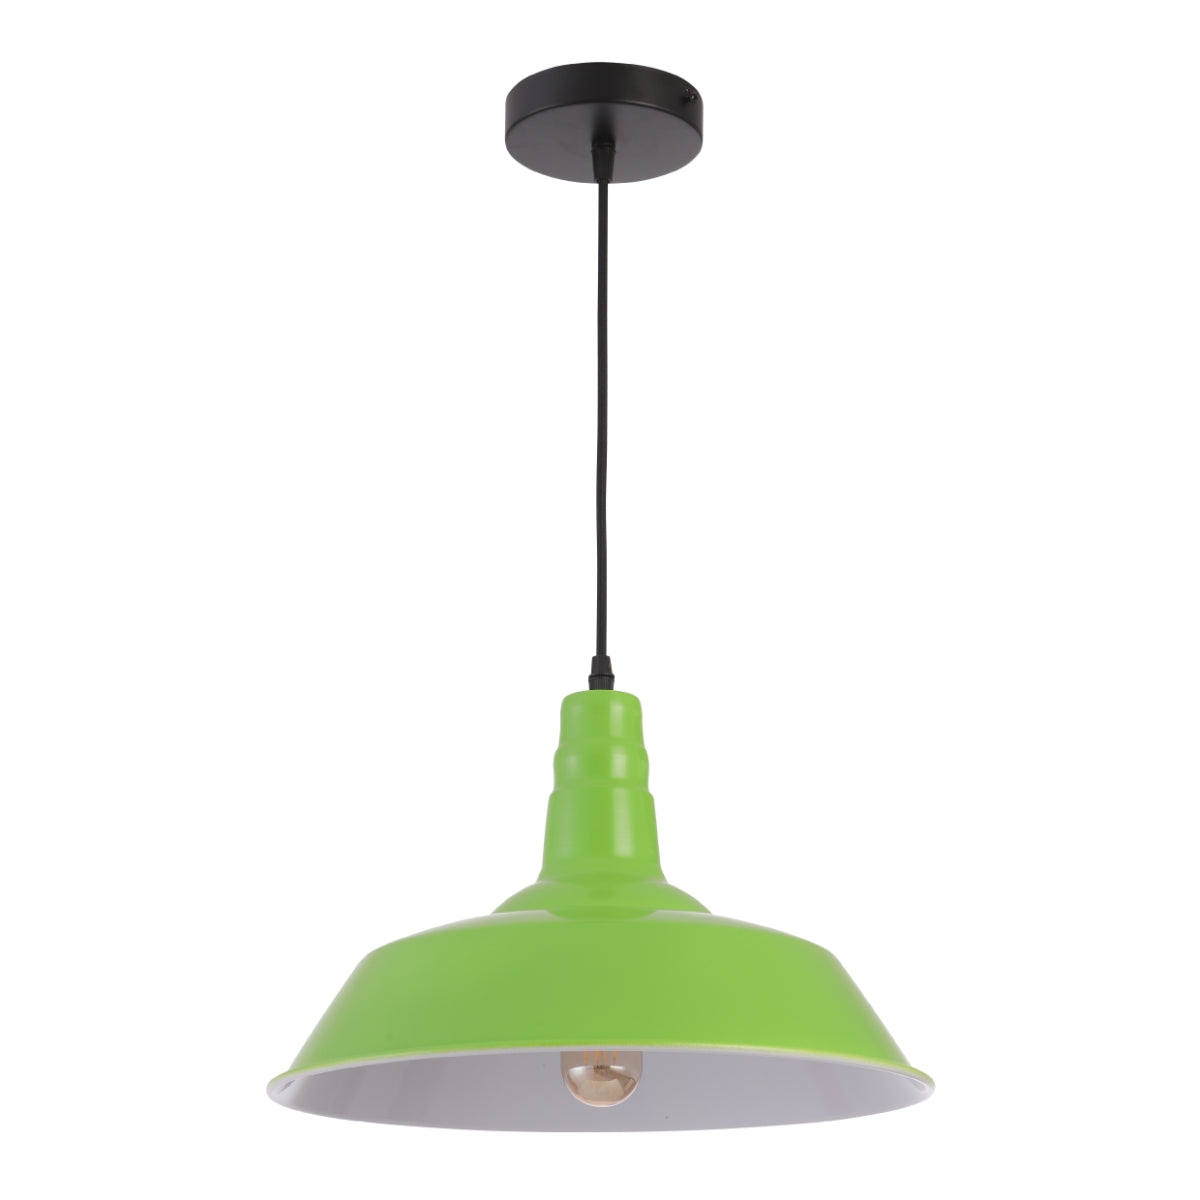 Main image of Pistachio Green Metal Step Pendant Ceiling Light with E27 | TEKLED  150-15042